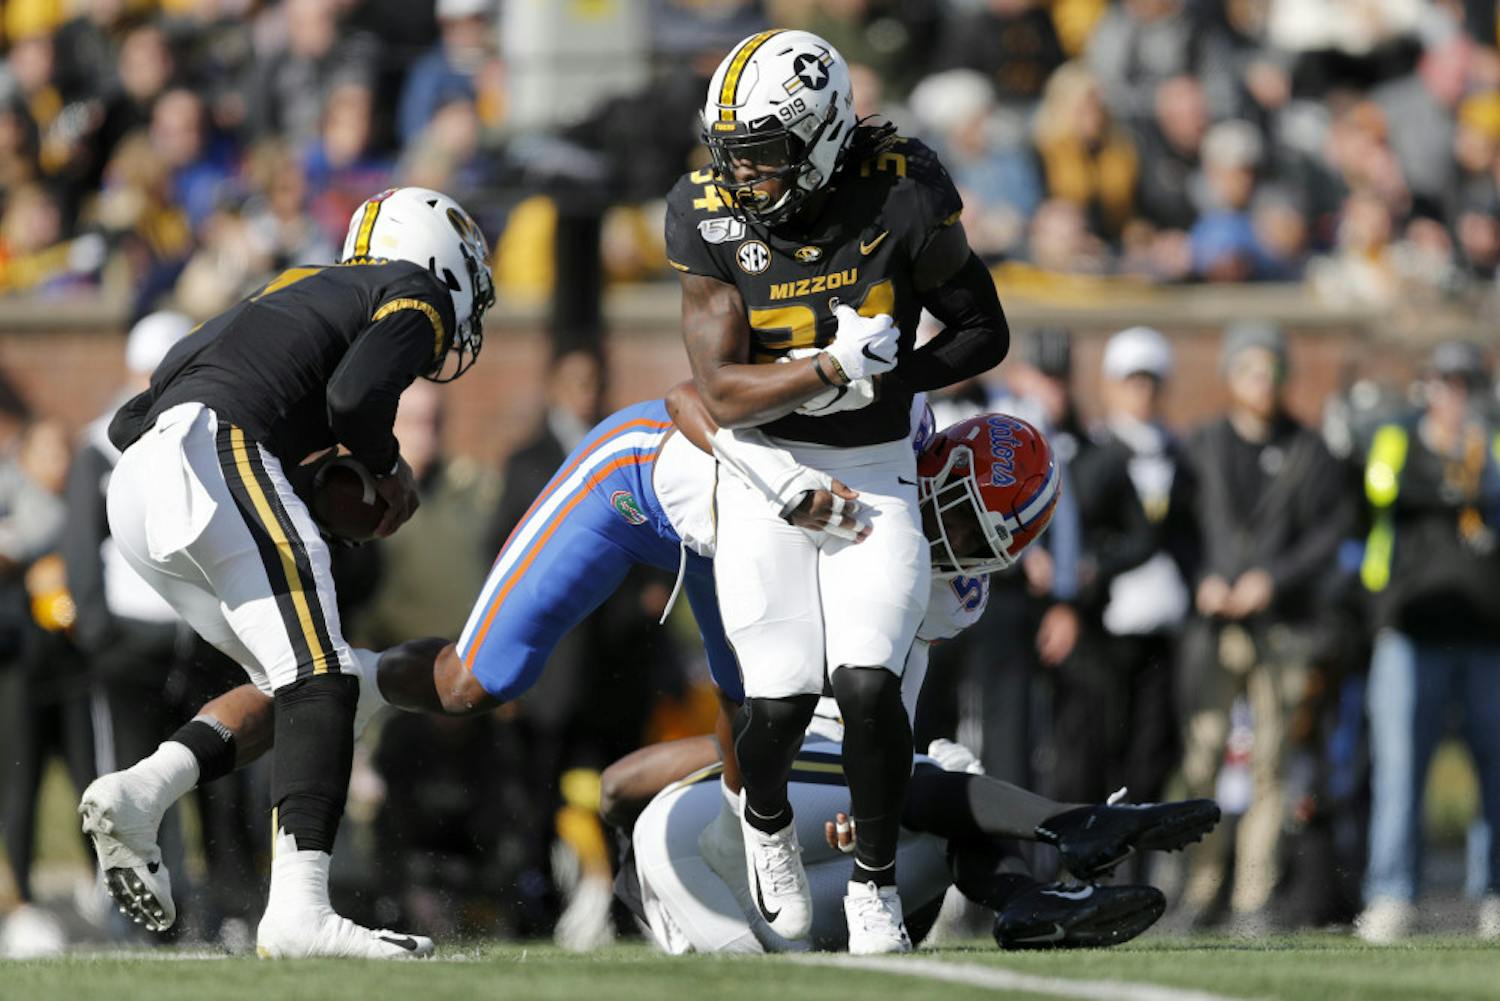 Missouri running back Larry Rountree III, front, struggles for yardage before being pulled down by Florida linebacker Jonathan Greenard during the first half of an NCAA college football game Saturday, Nov. 16, 2019, in Columbia, Mo. (AP Photo/Jeff Roberson)